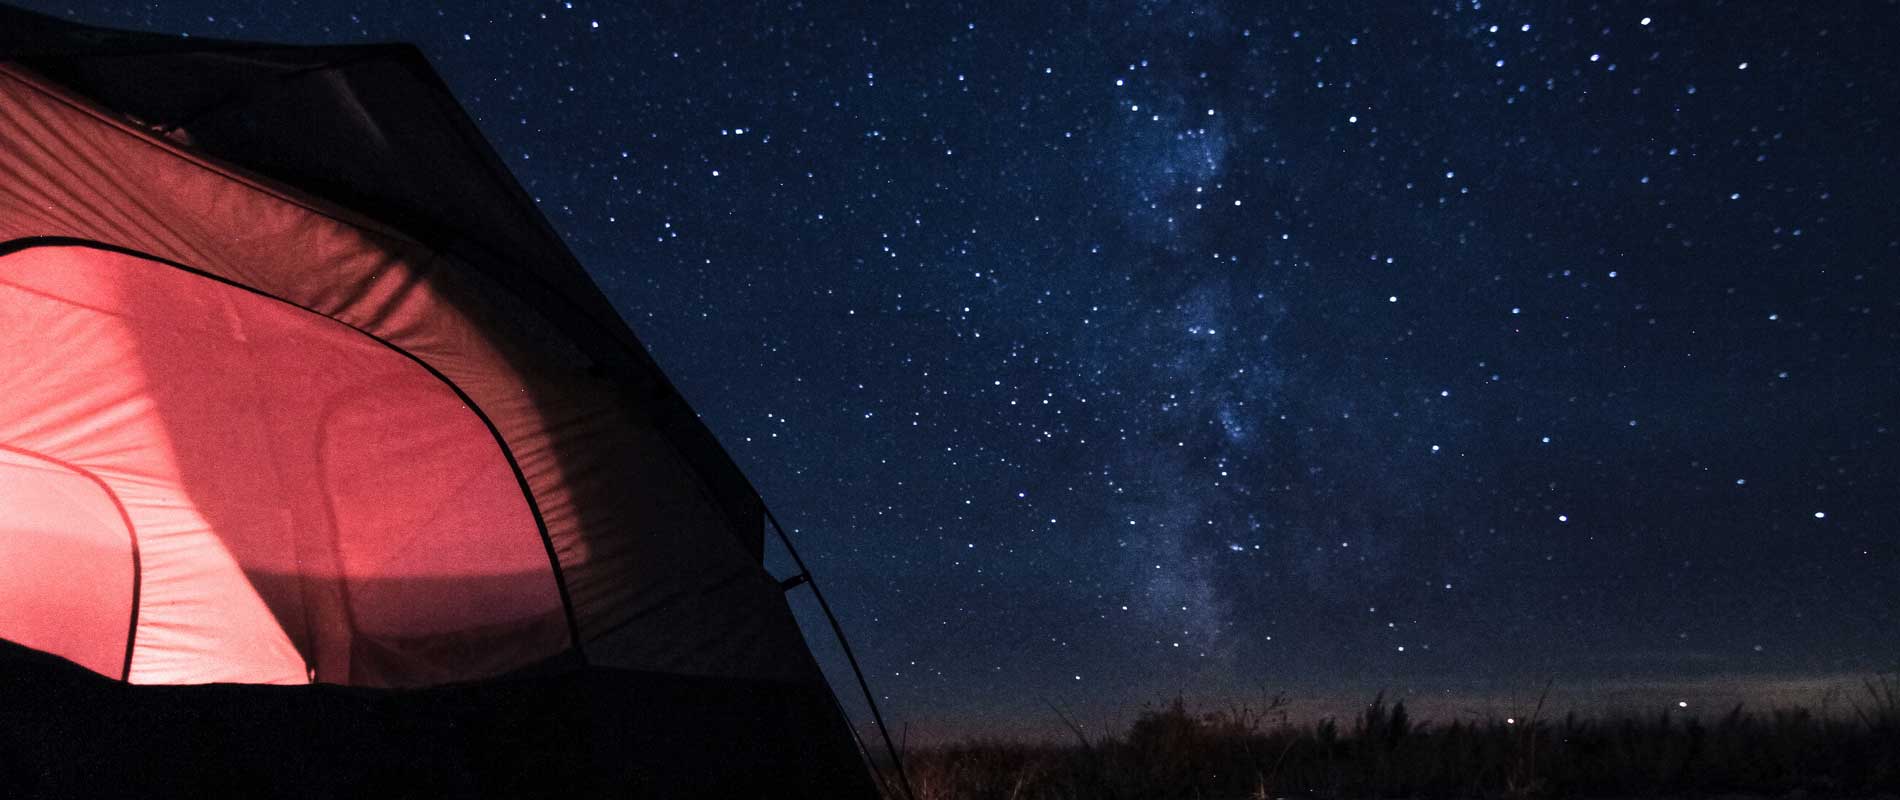 Red tent in a field at nighttime with clear, star-filled skies